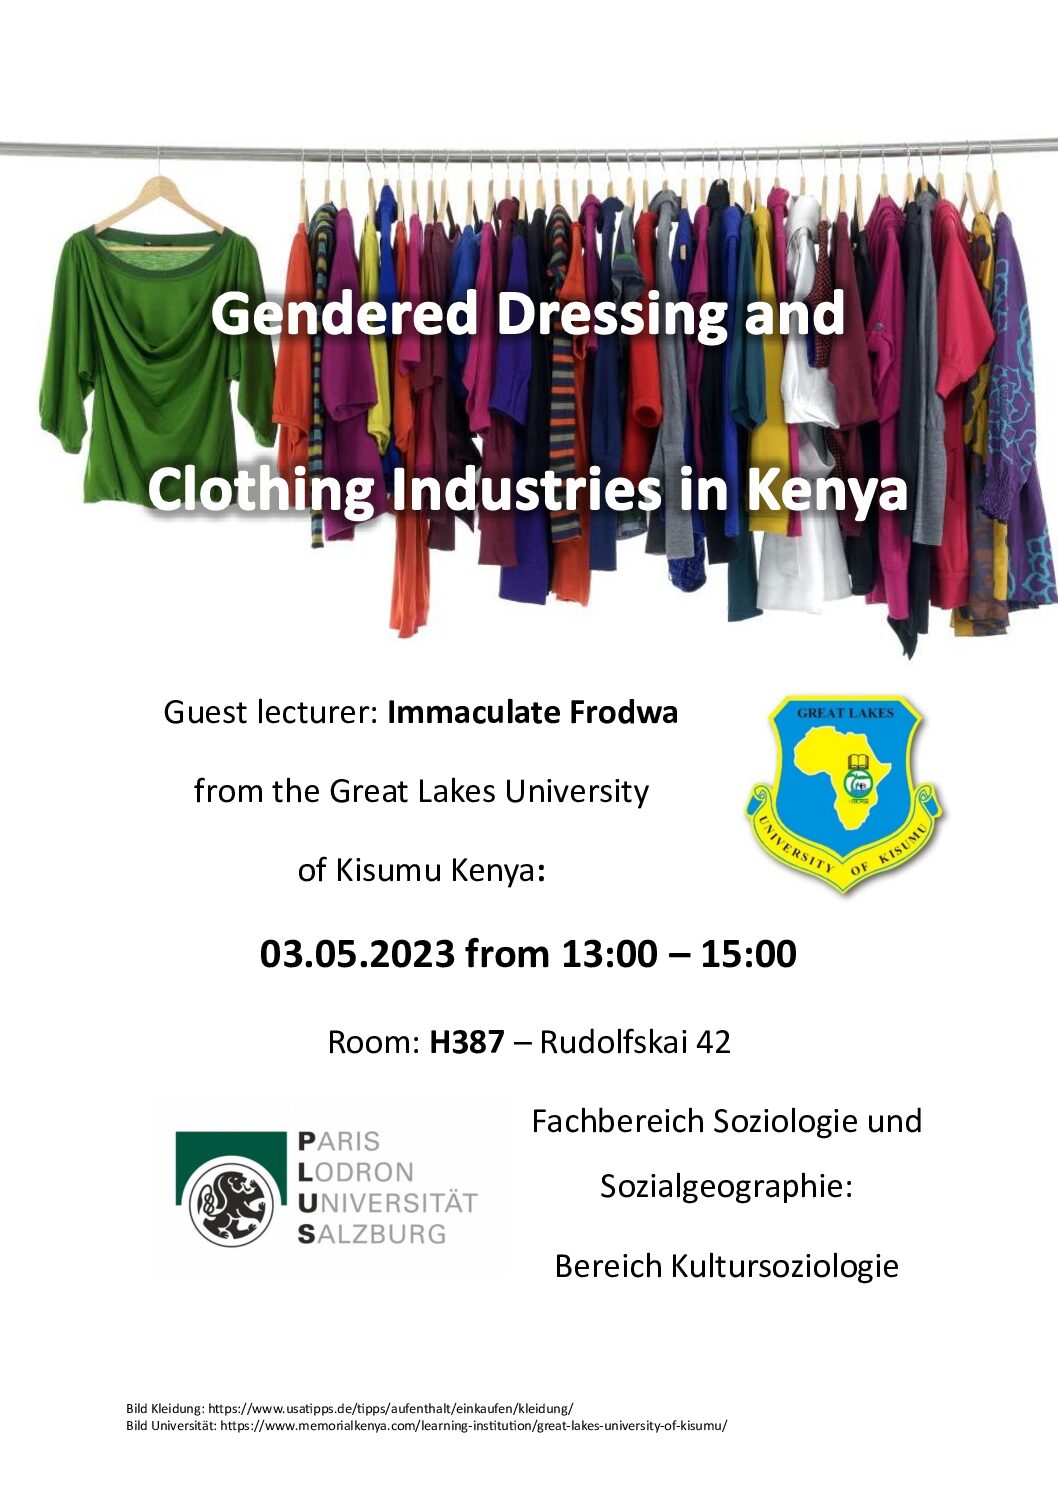 GV Gendered Dressing and Clothing Industries in Kenya - Immaculate Frodwa - 3.4., 13-15, HS 387